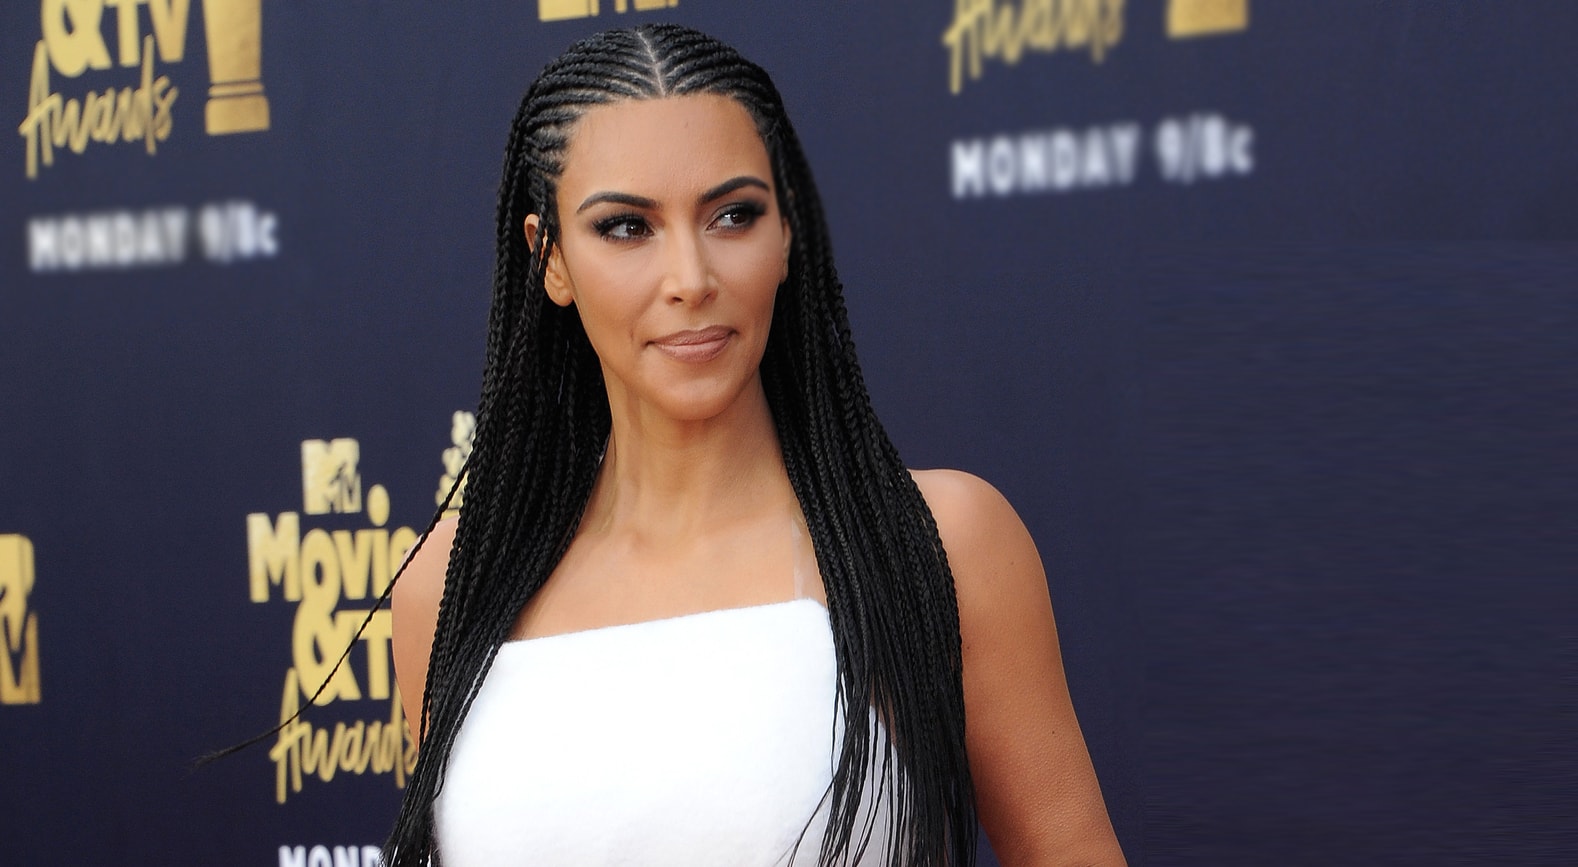 Discover how Kim Kardashian's appearance has changed